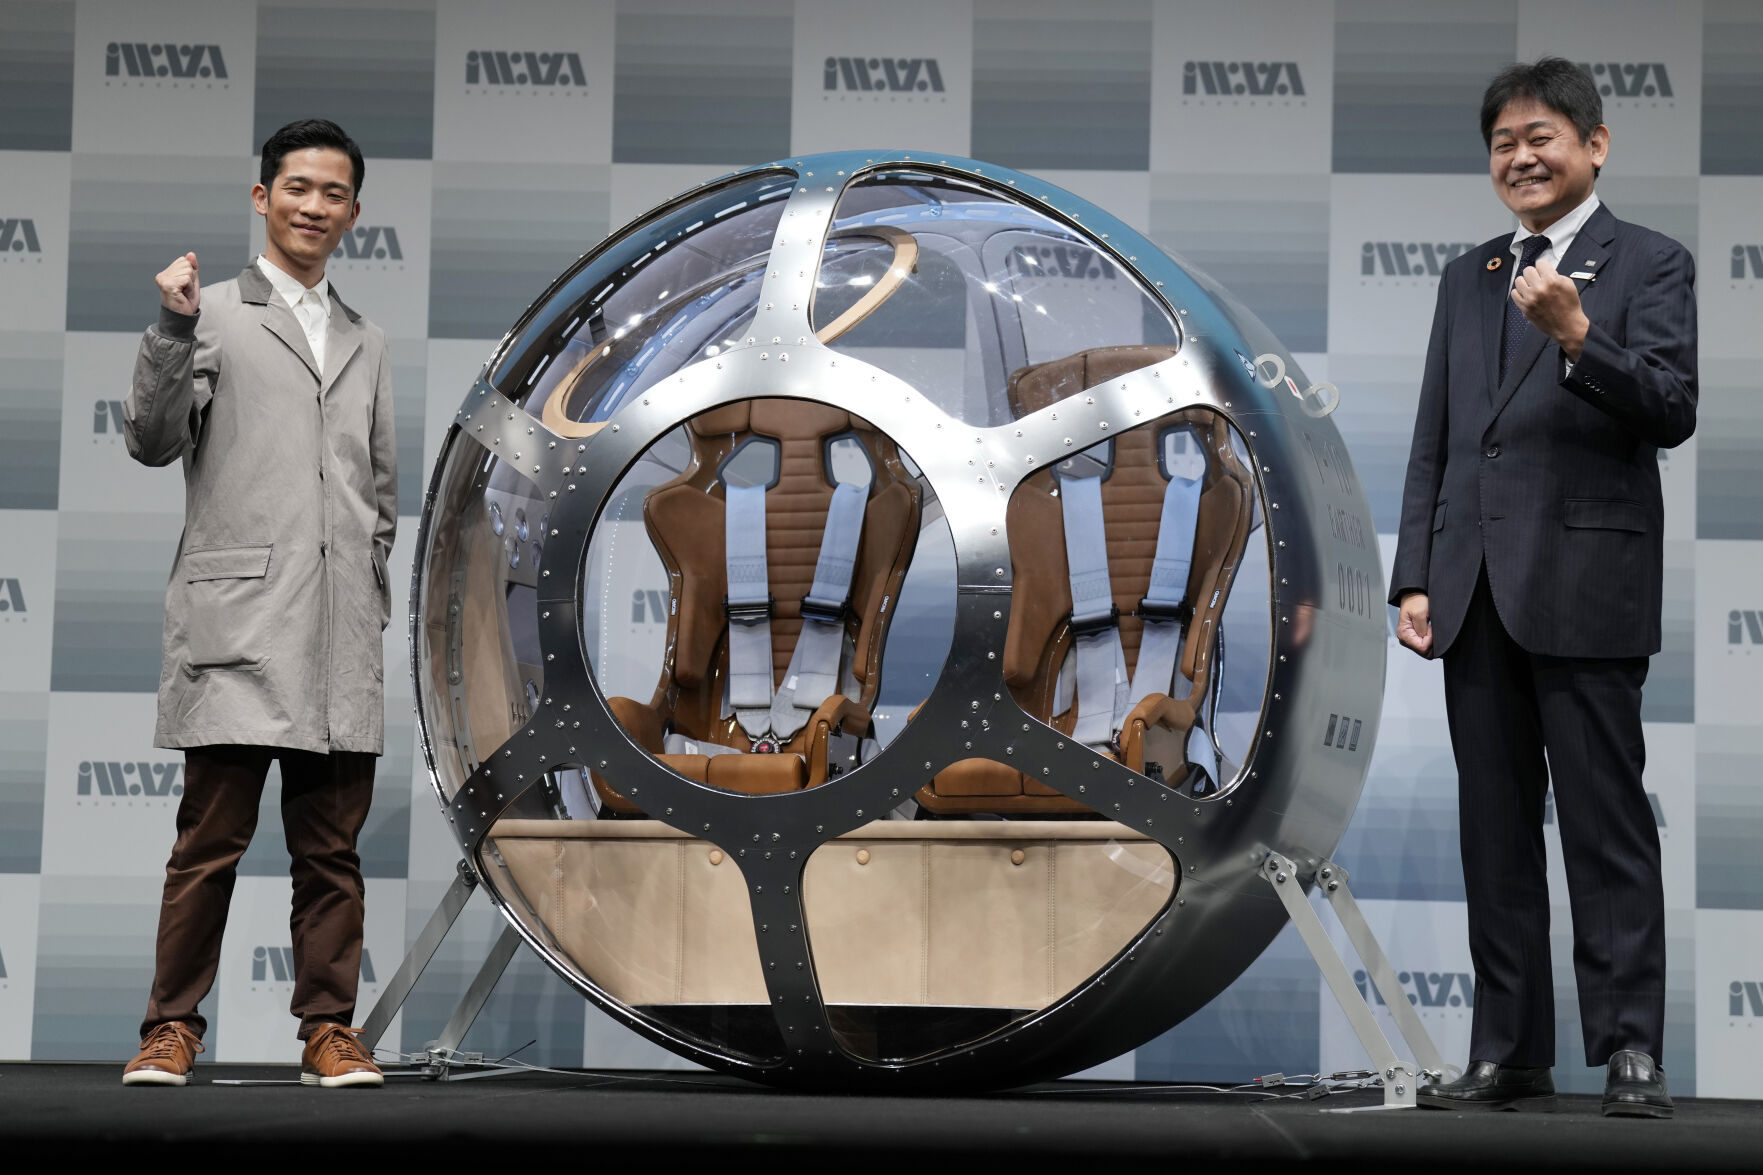 <p>Keisuke Iwaya, left, CEO of a Japanese space development company, Iwaya Giken, and Takayuki Hanasaka, JTB Senior Managing Executive Officer, pose for a photo after unveiling a two-seater cabin and a balloon that the company says is capable of rising to an altitude of 15 miles, which is roughly the middle of the stratosphere, as he speaks during a news conference in Tokyo, Tuesday, Feb. 21, 2023. (AP Photo/Eugene Hoshiko)</p>   PHOTO CREDIT: Eugene Hoshiko 